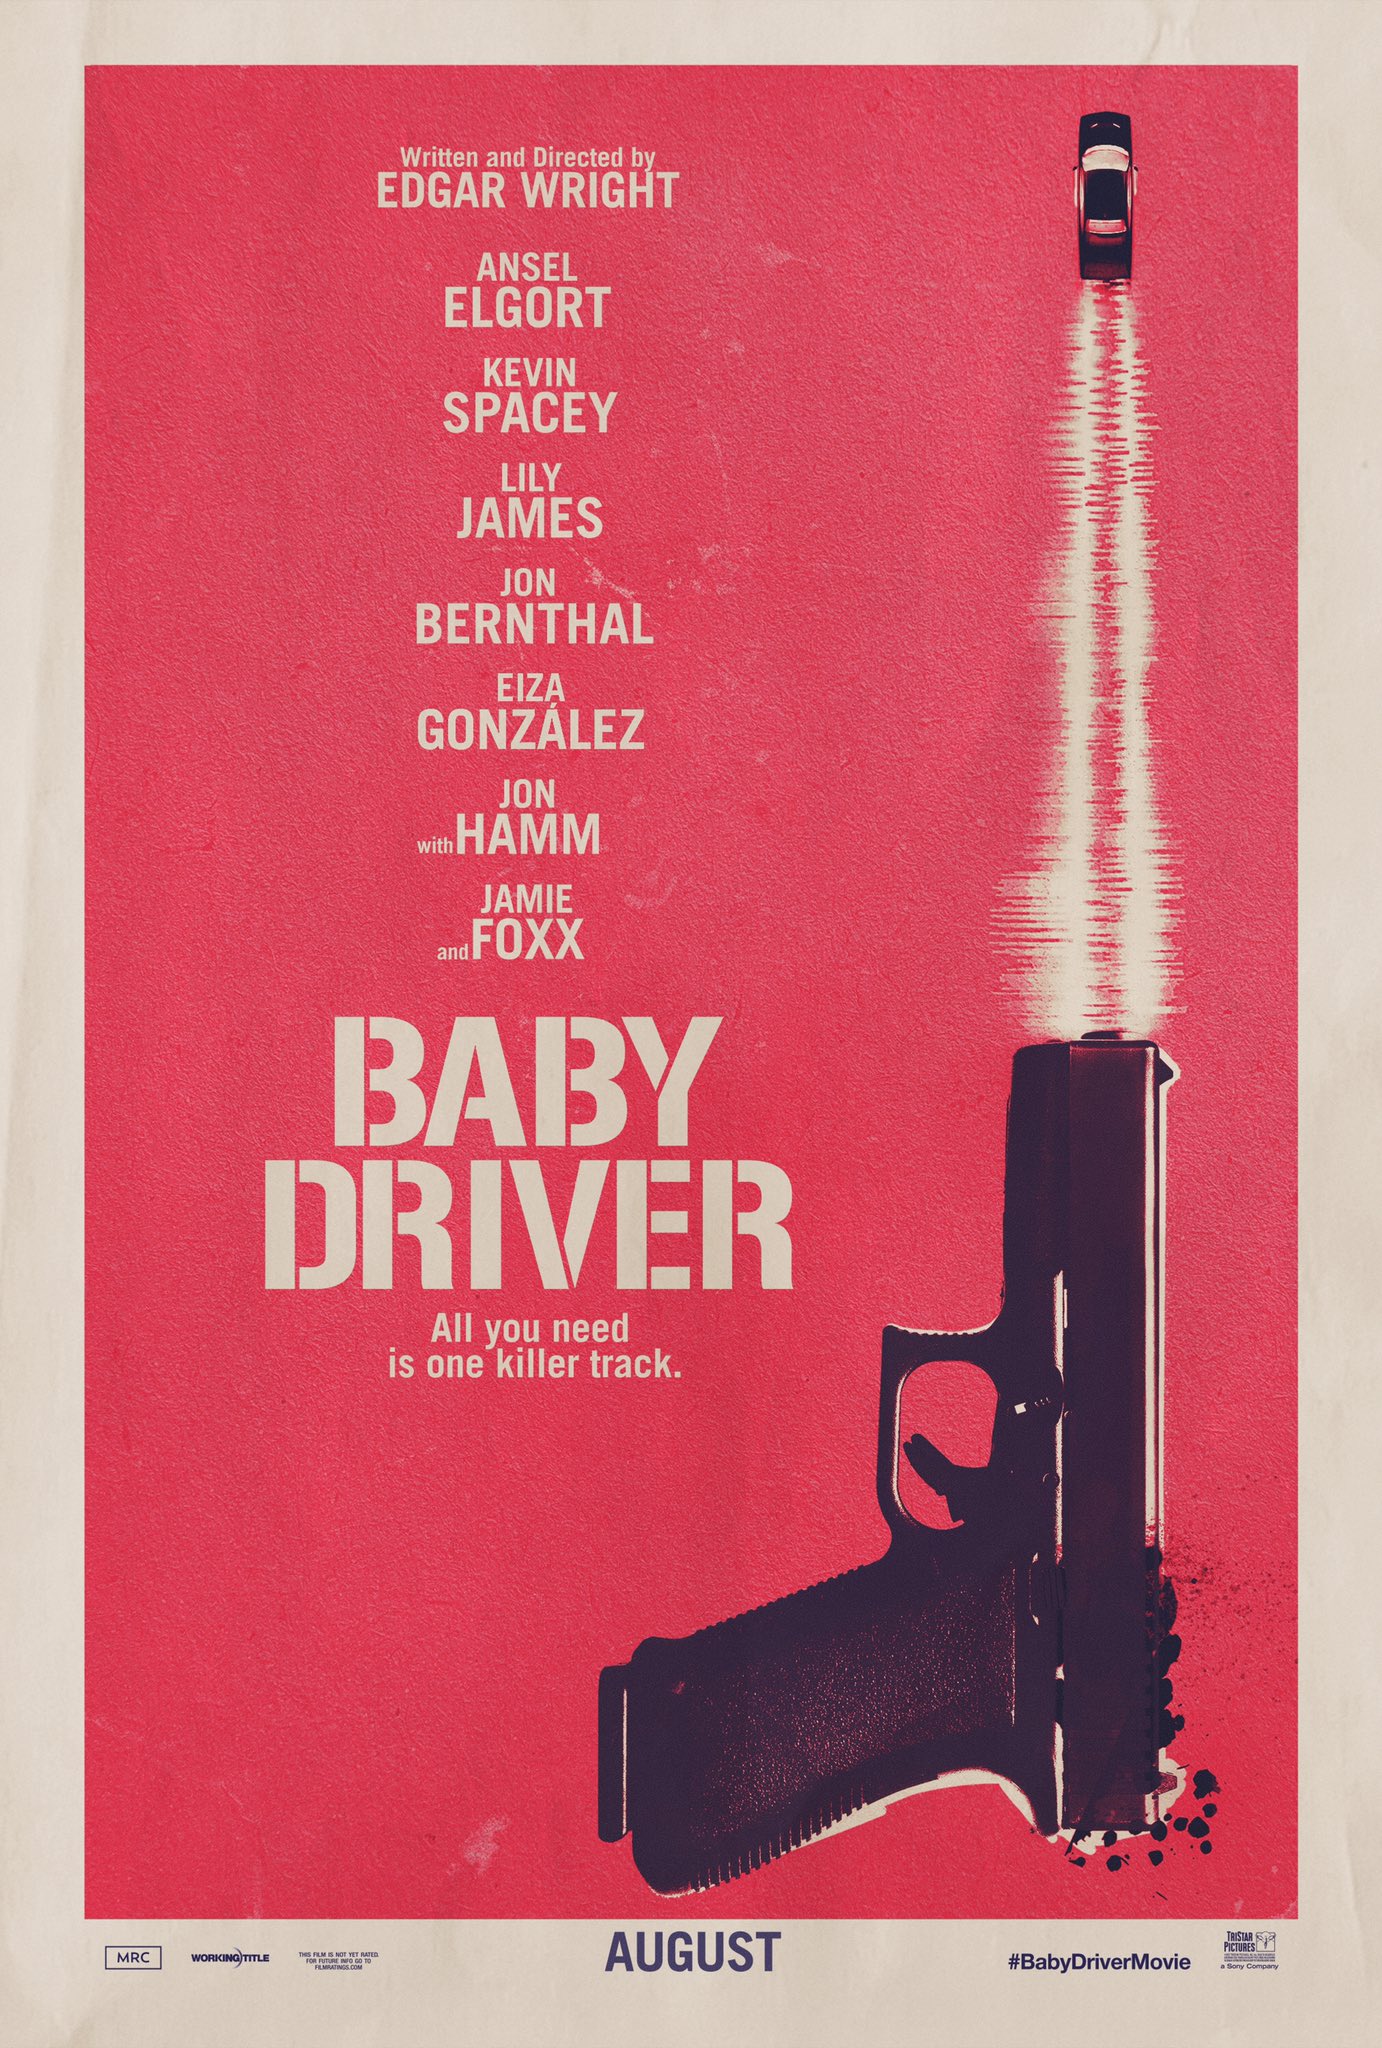 edgar wright - Baby Driver : tuer n'est pas jouer babydriver